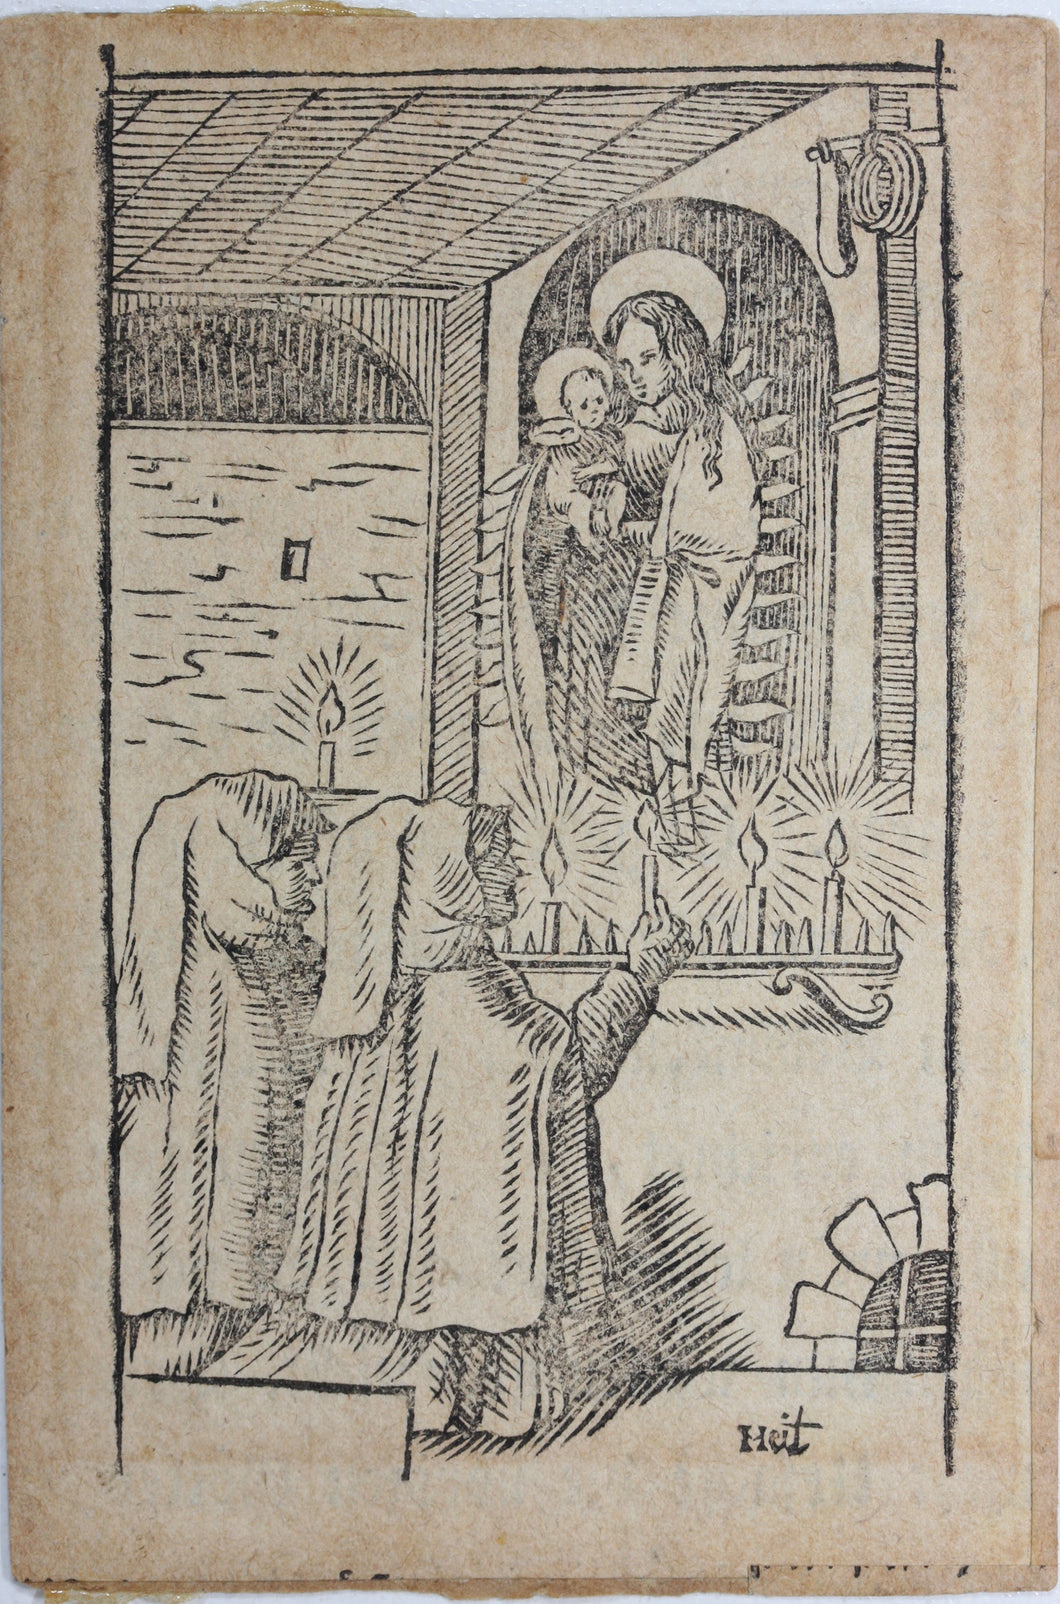 Hans Holbein the Younger, after. Two Women Dedicating Candles Before an Image of the Virgin. Woodcut. Late XVIII C.